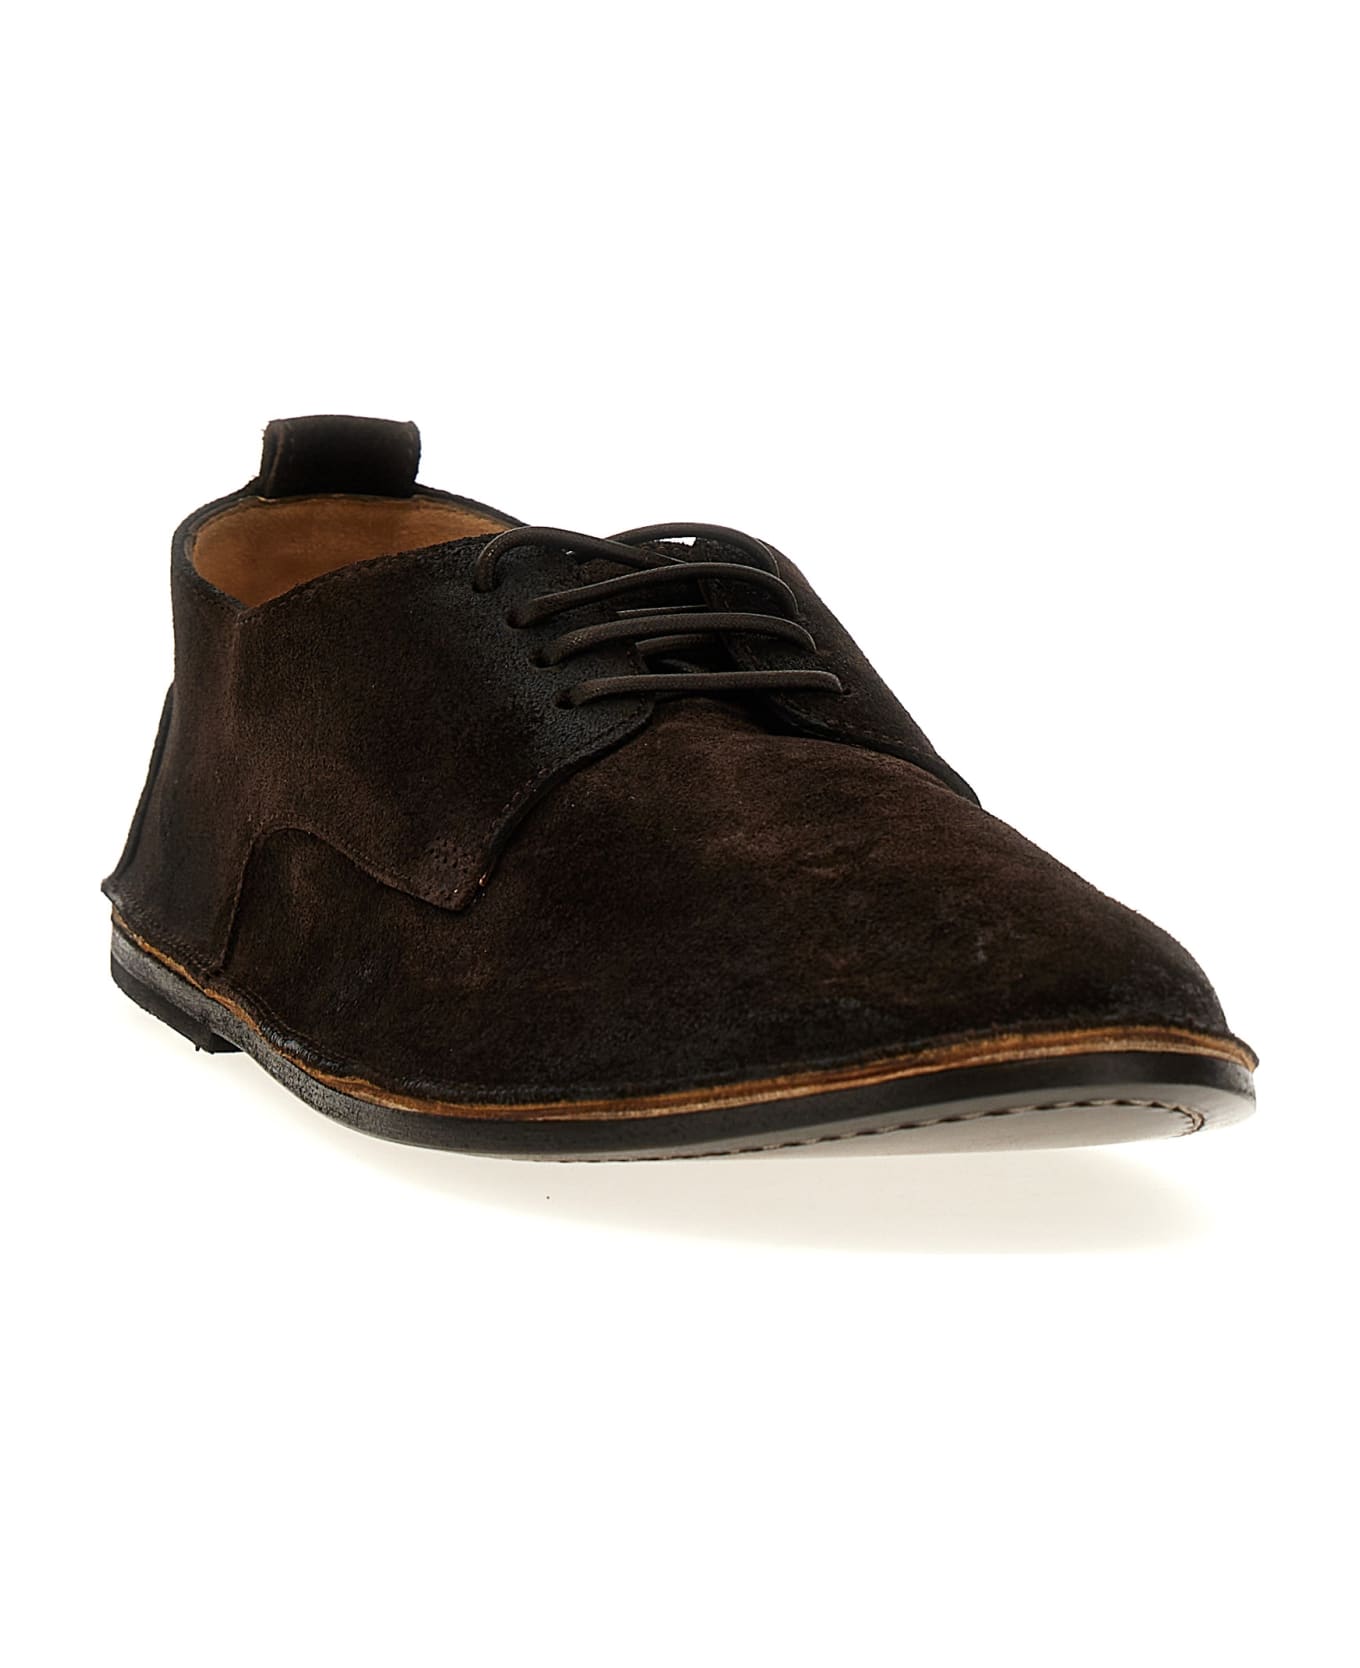 Marsell 'strasacco' Lace Up Shoes - Brown